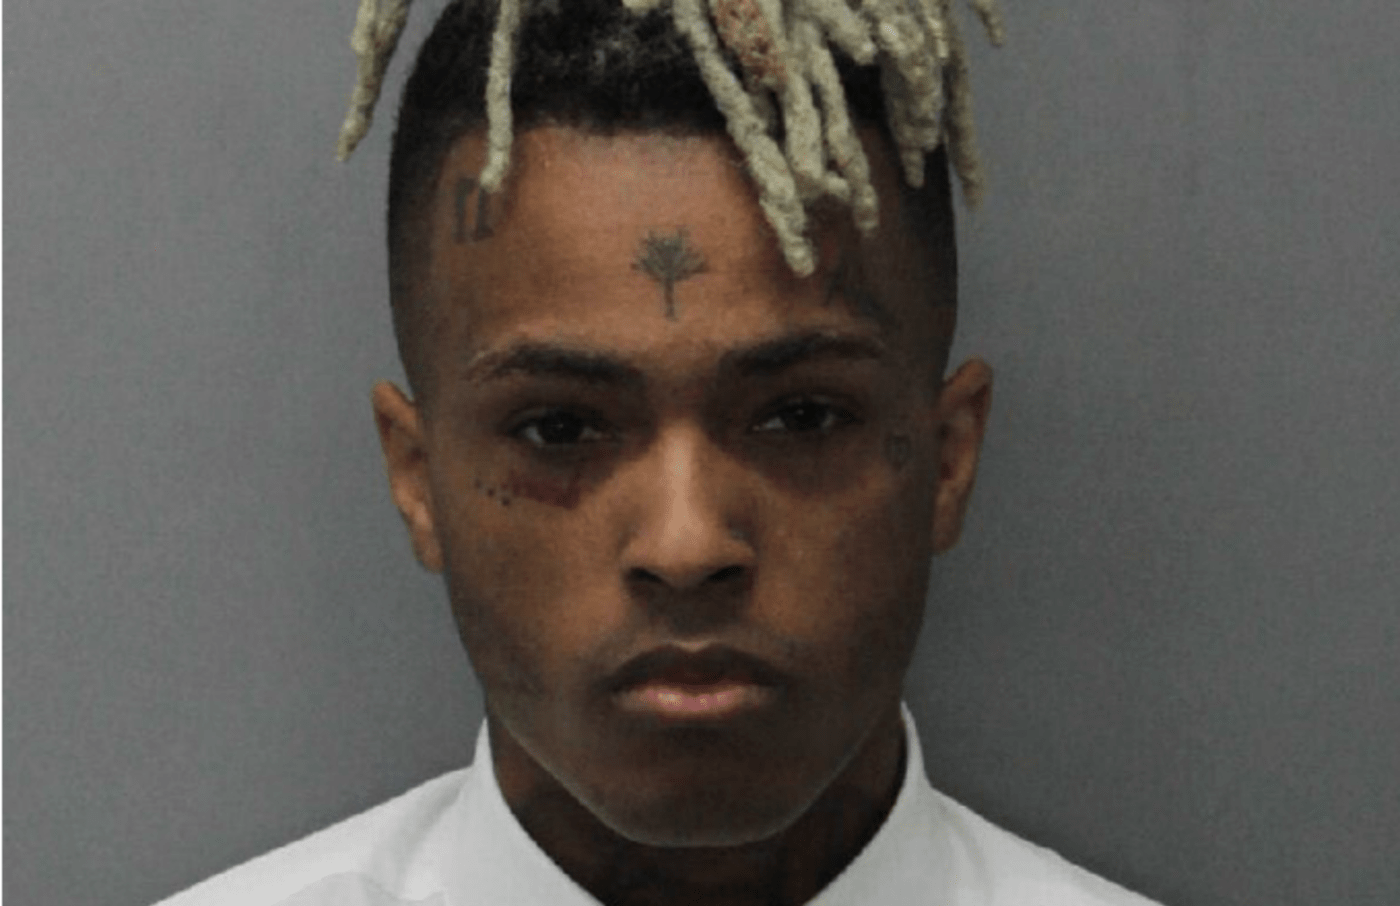 Rapper XXXTentacion, also known as Jahseh Dwayne Onfroy poses for his mugshot